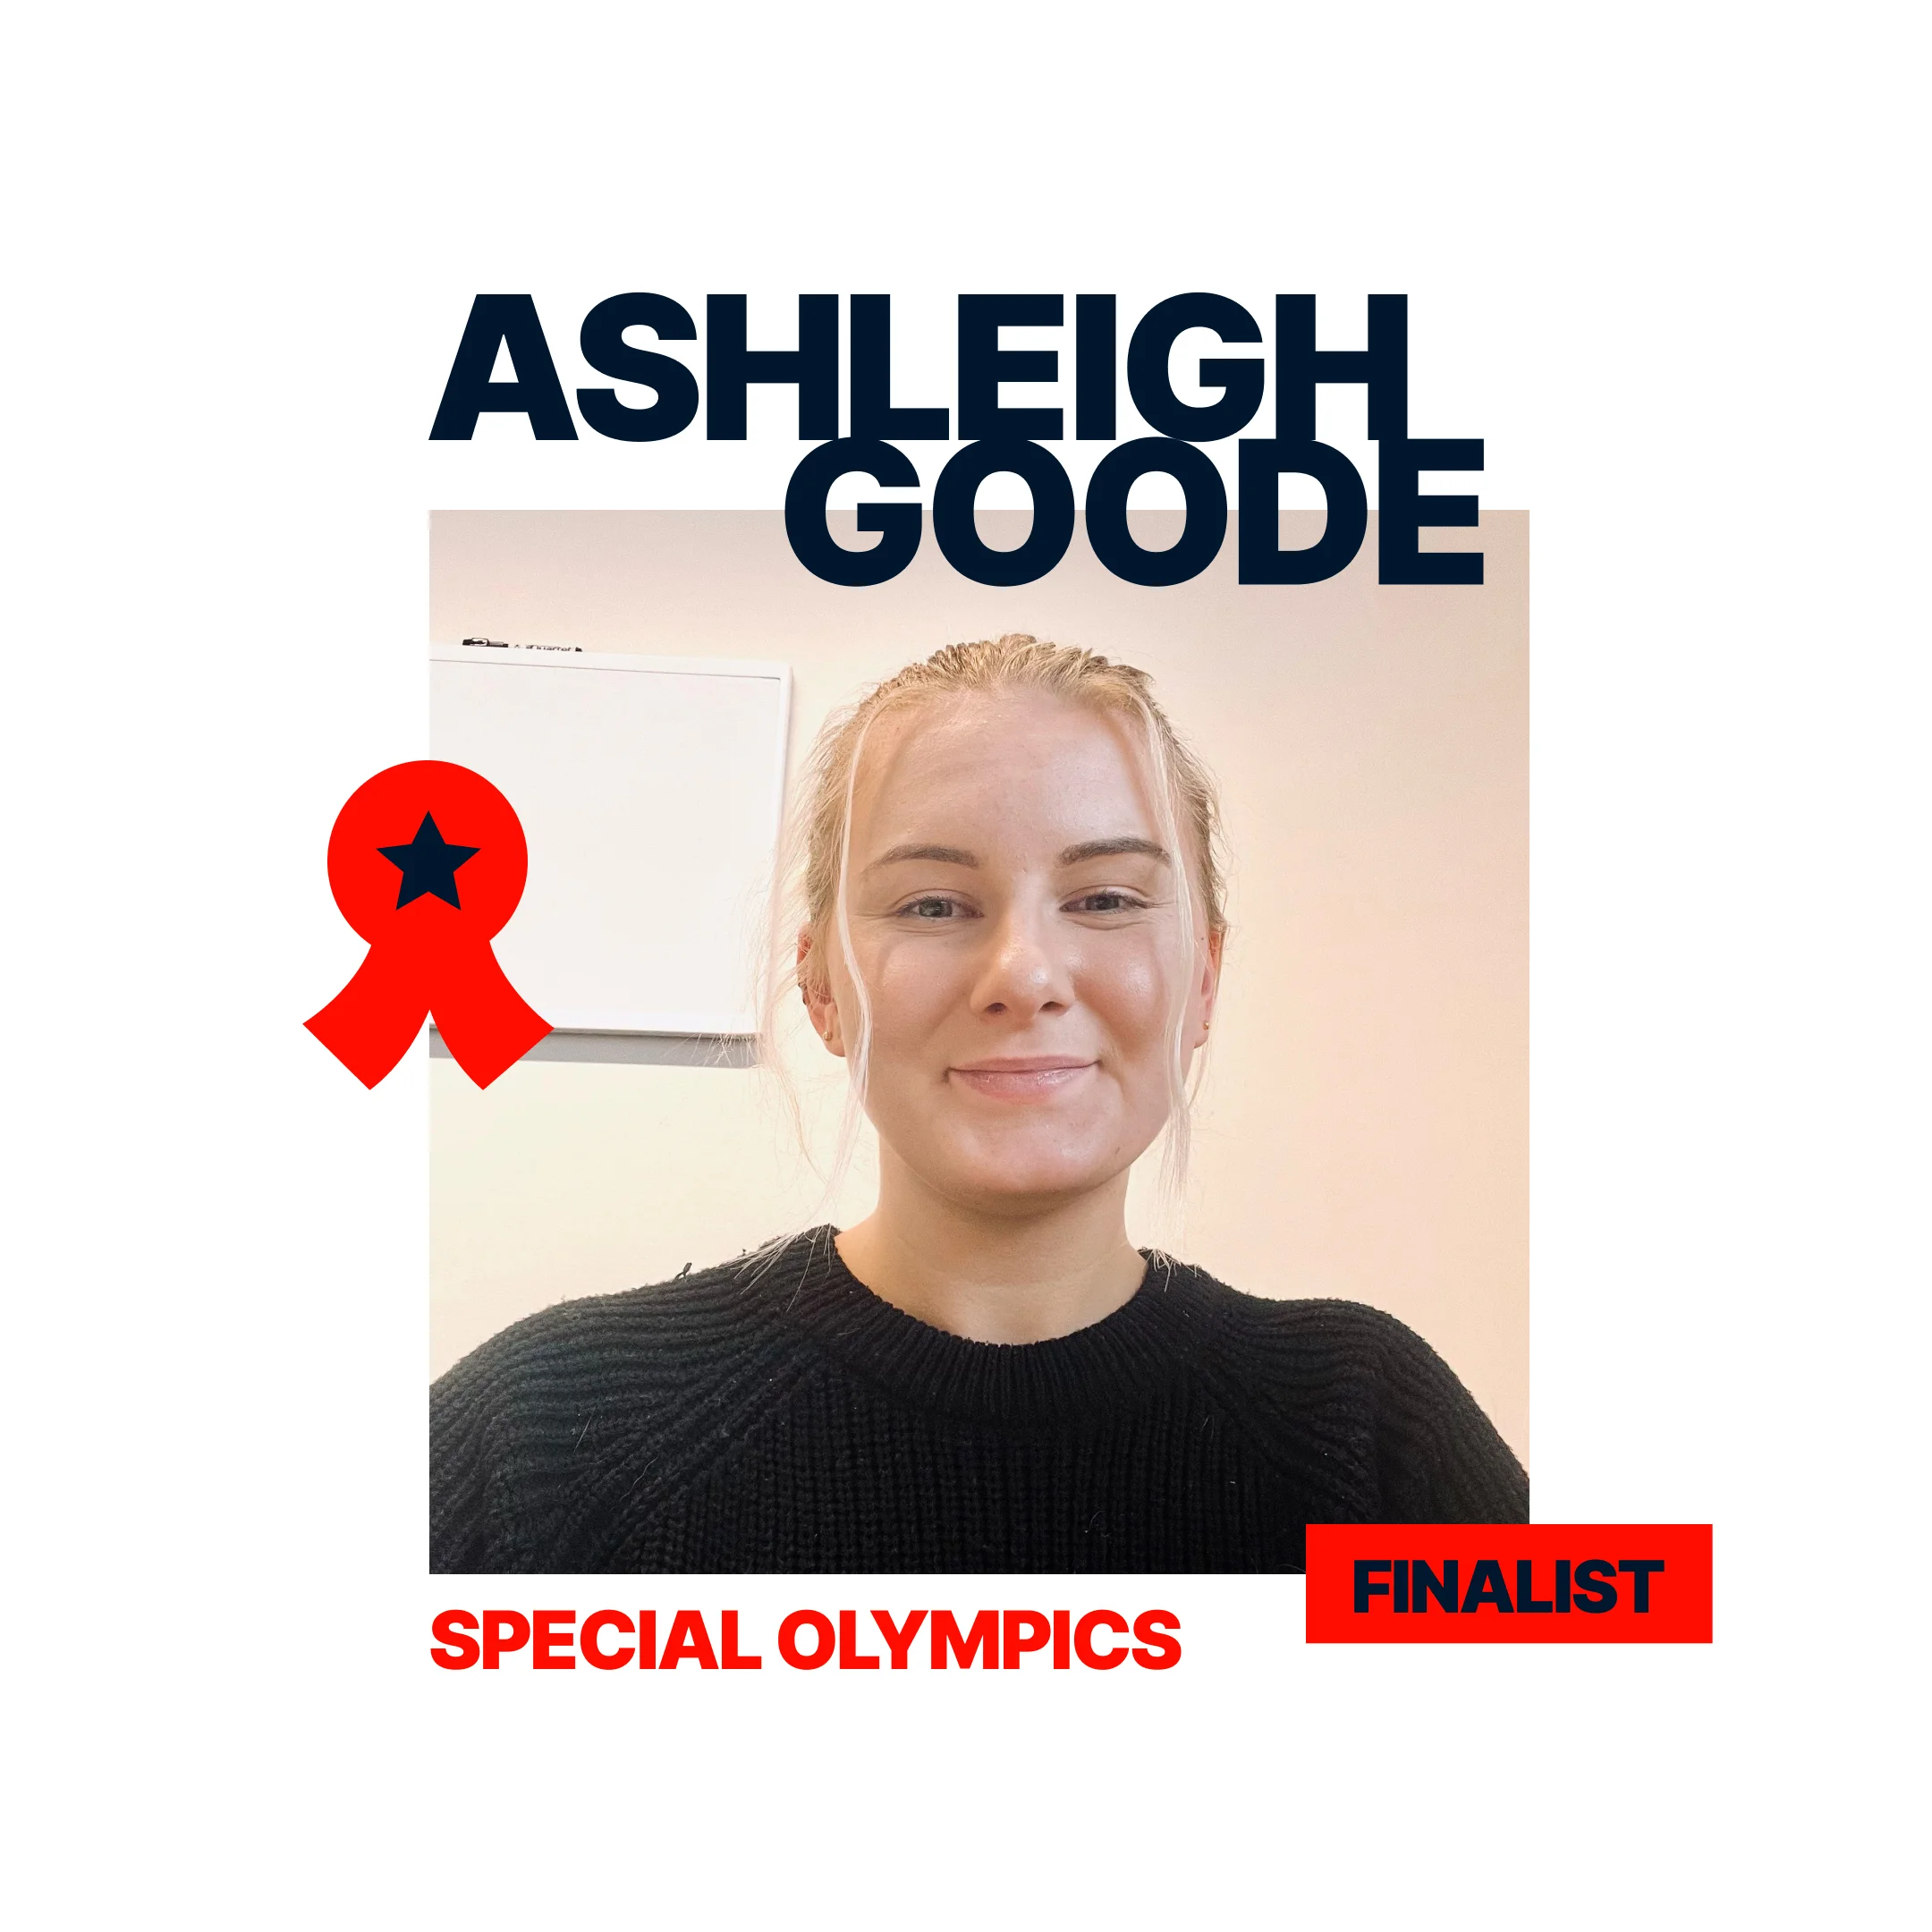 Ashleigh Goode, Special Olympics